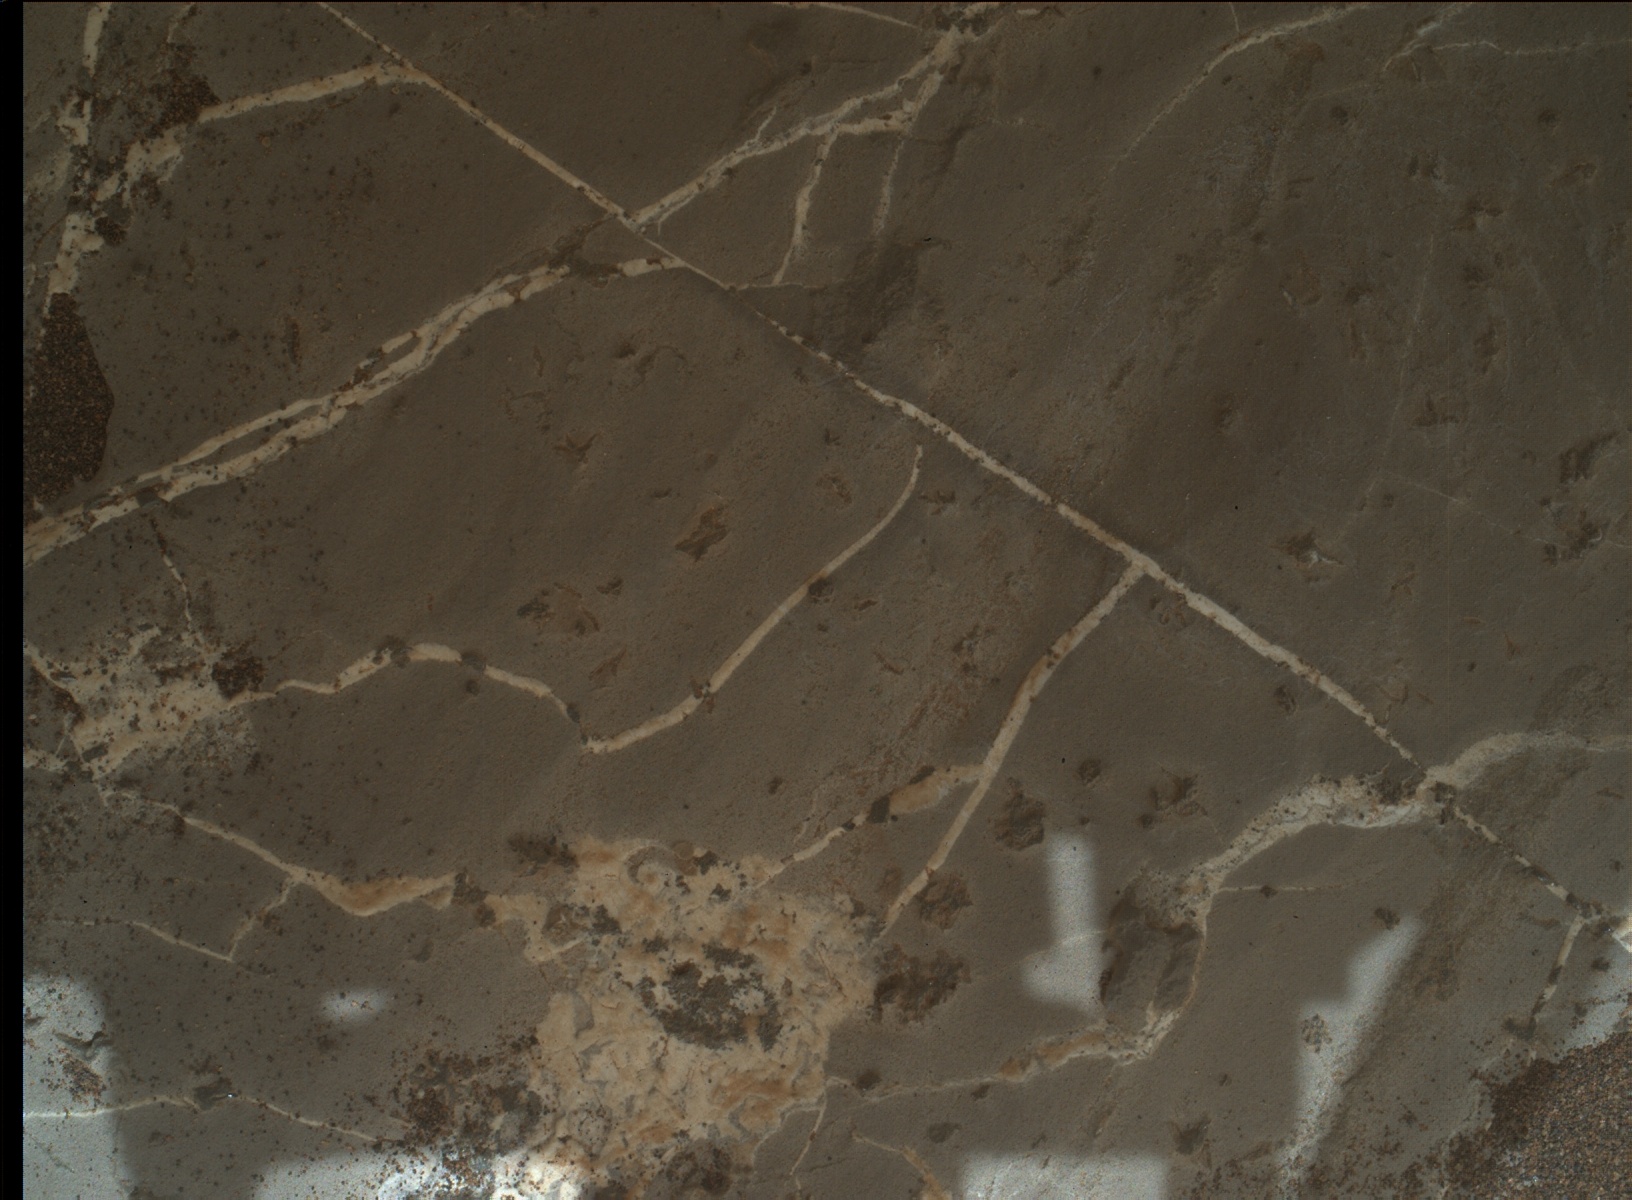 Nasa's Mars rover Curiosity acquired this image using its Mars Hand Lens Imager (MAHLI) on Sol 2223